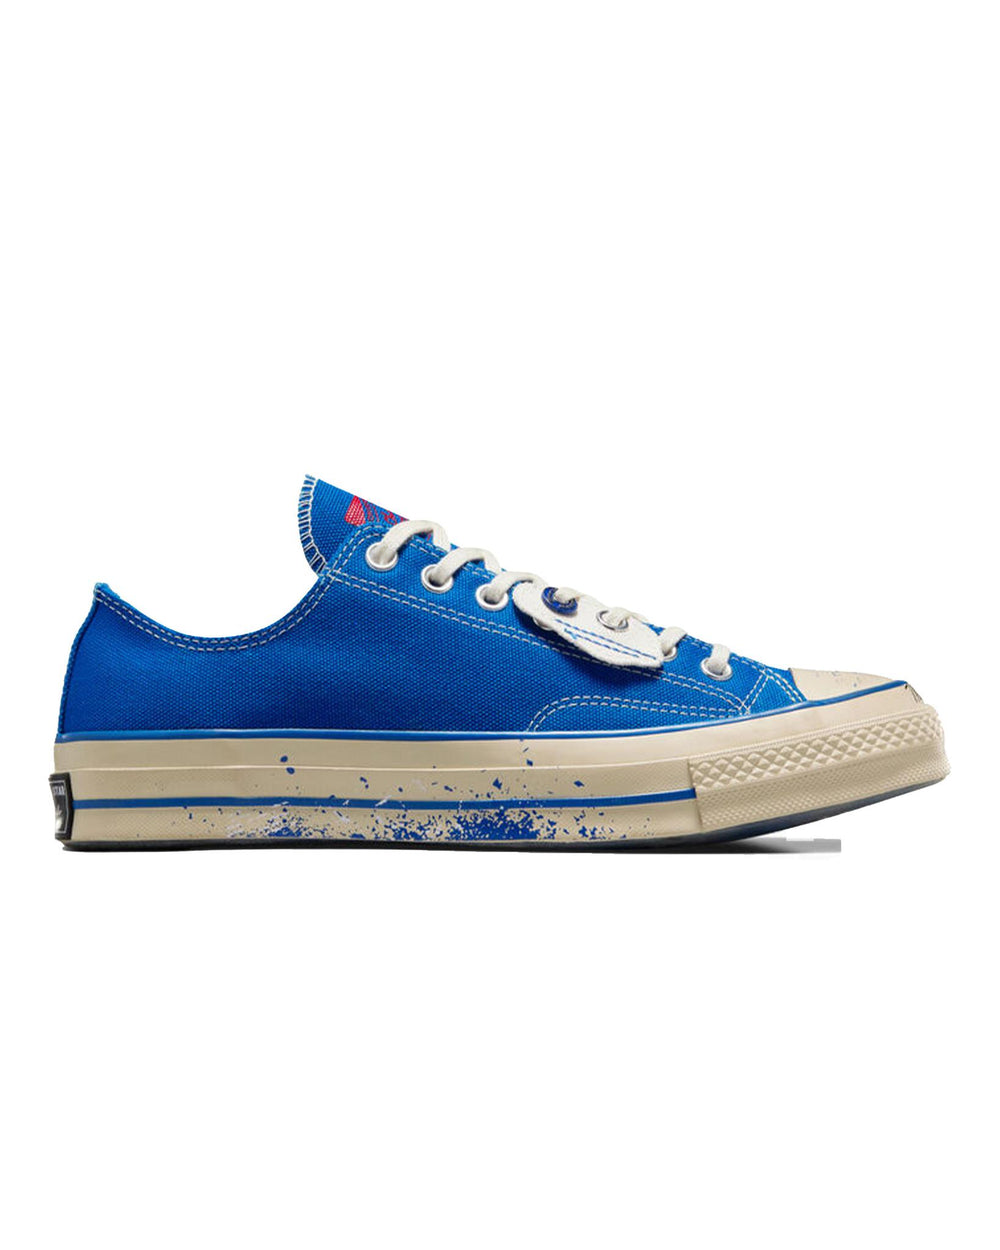 Converse x ADER ERROR Chuck 70 Ox Imperial Blue/White/Black | STASHED